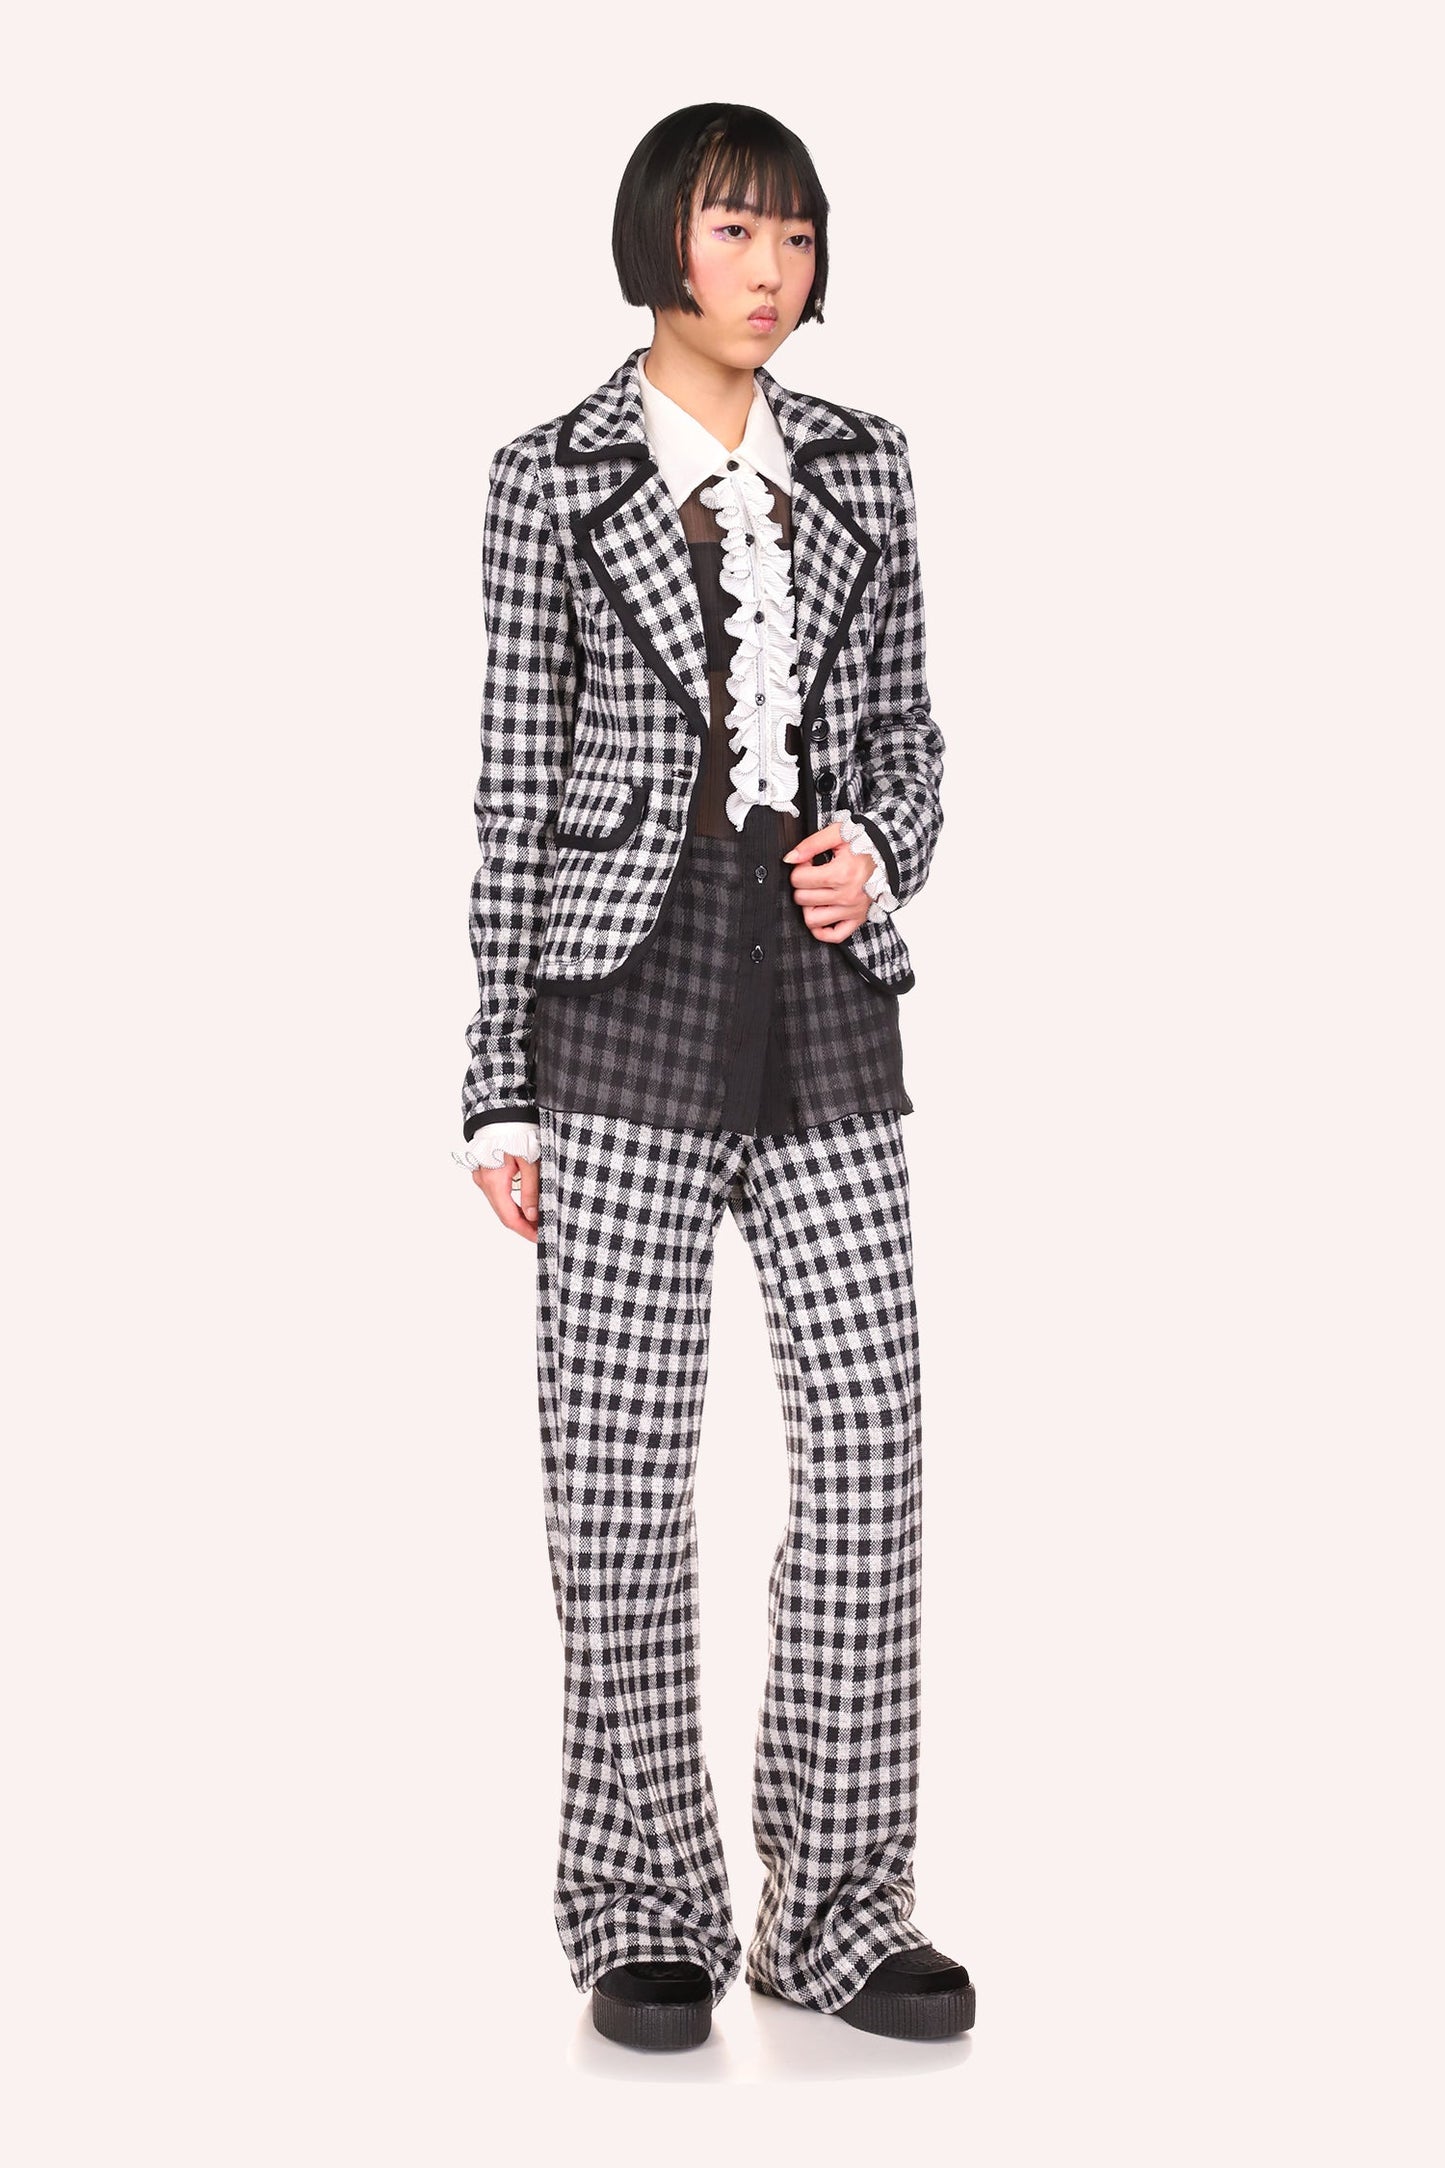 Wear Gingham Blazer, long sleeves at wrist, extra-large collar, 2- flap pockets, 3 black buttons